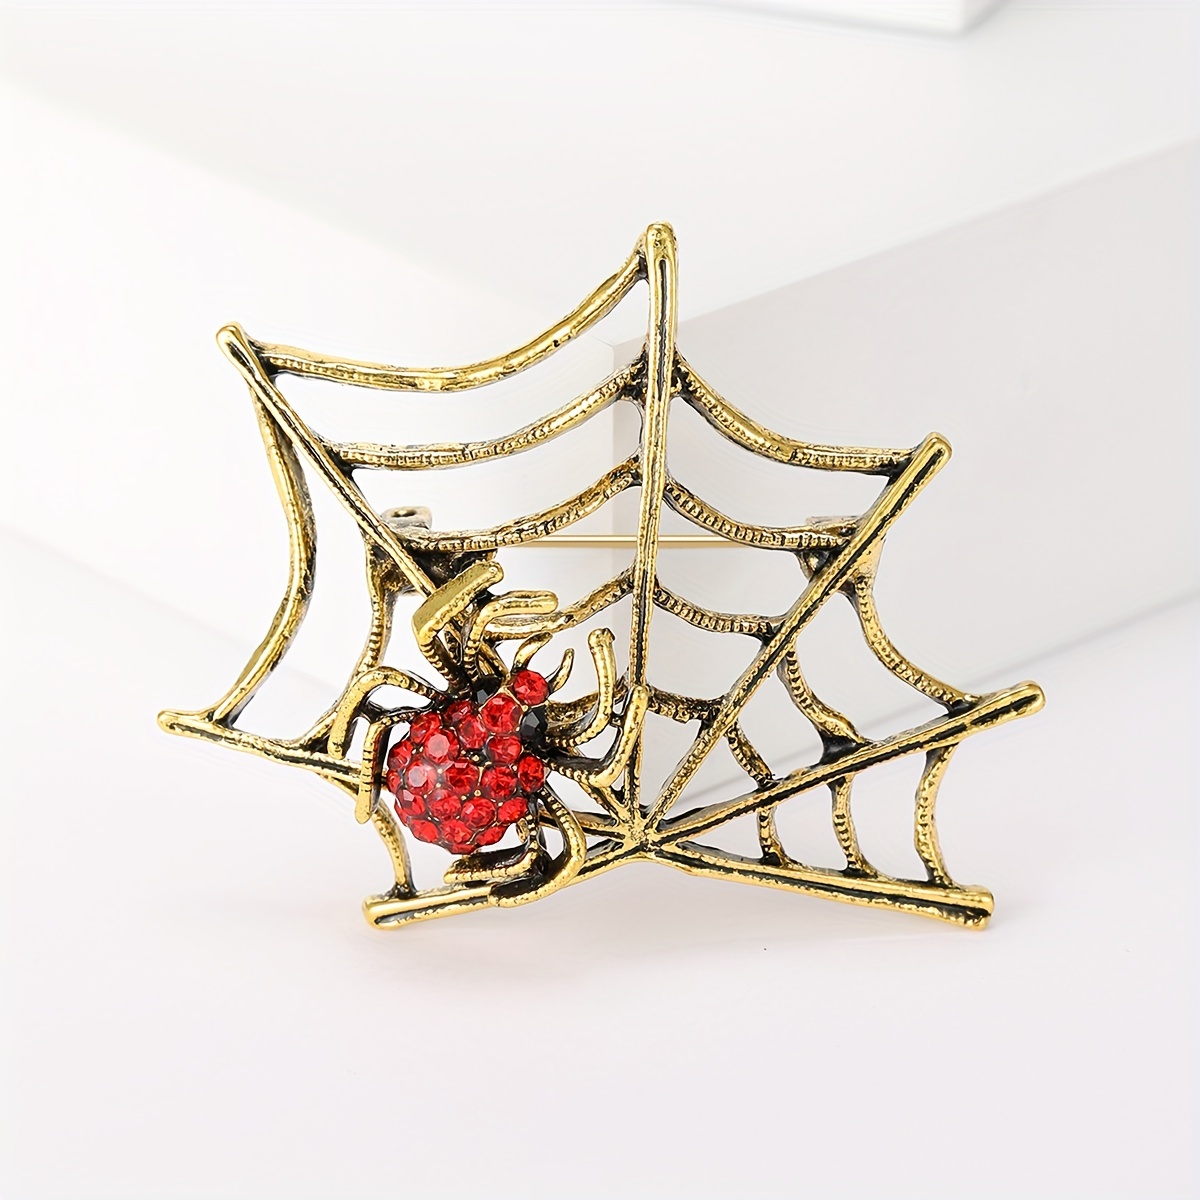 Vintage Style Spider Shape Alloy Brooch Pin Inlaid Colorful Shiny